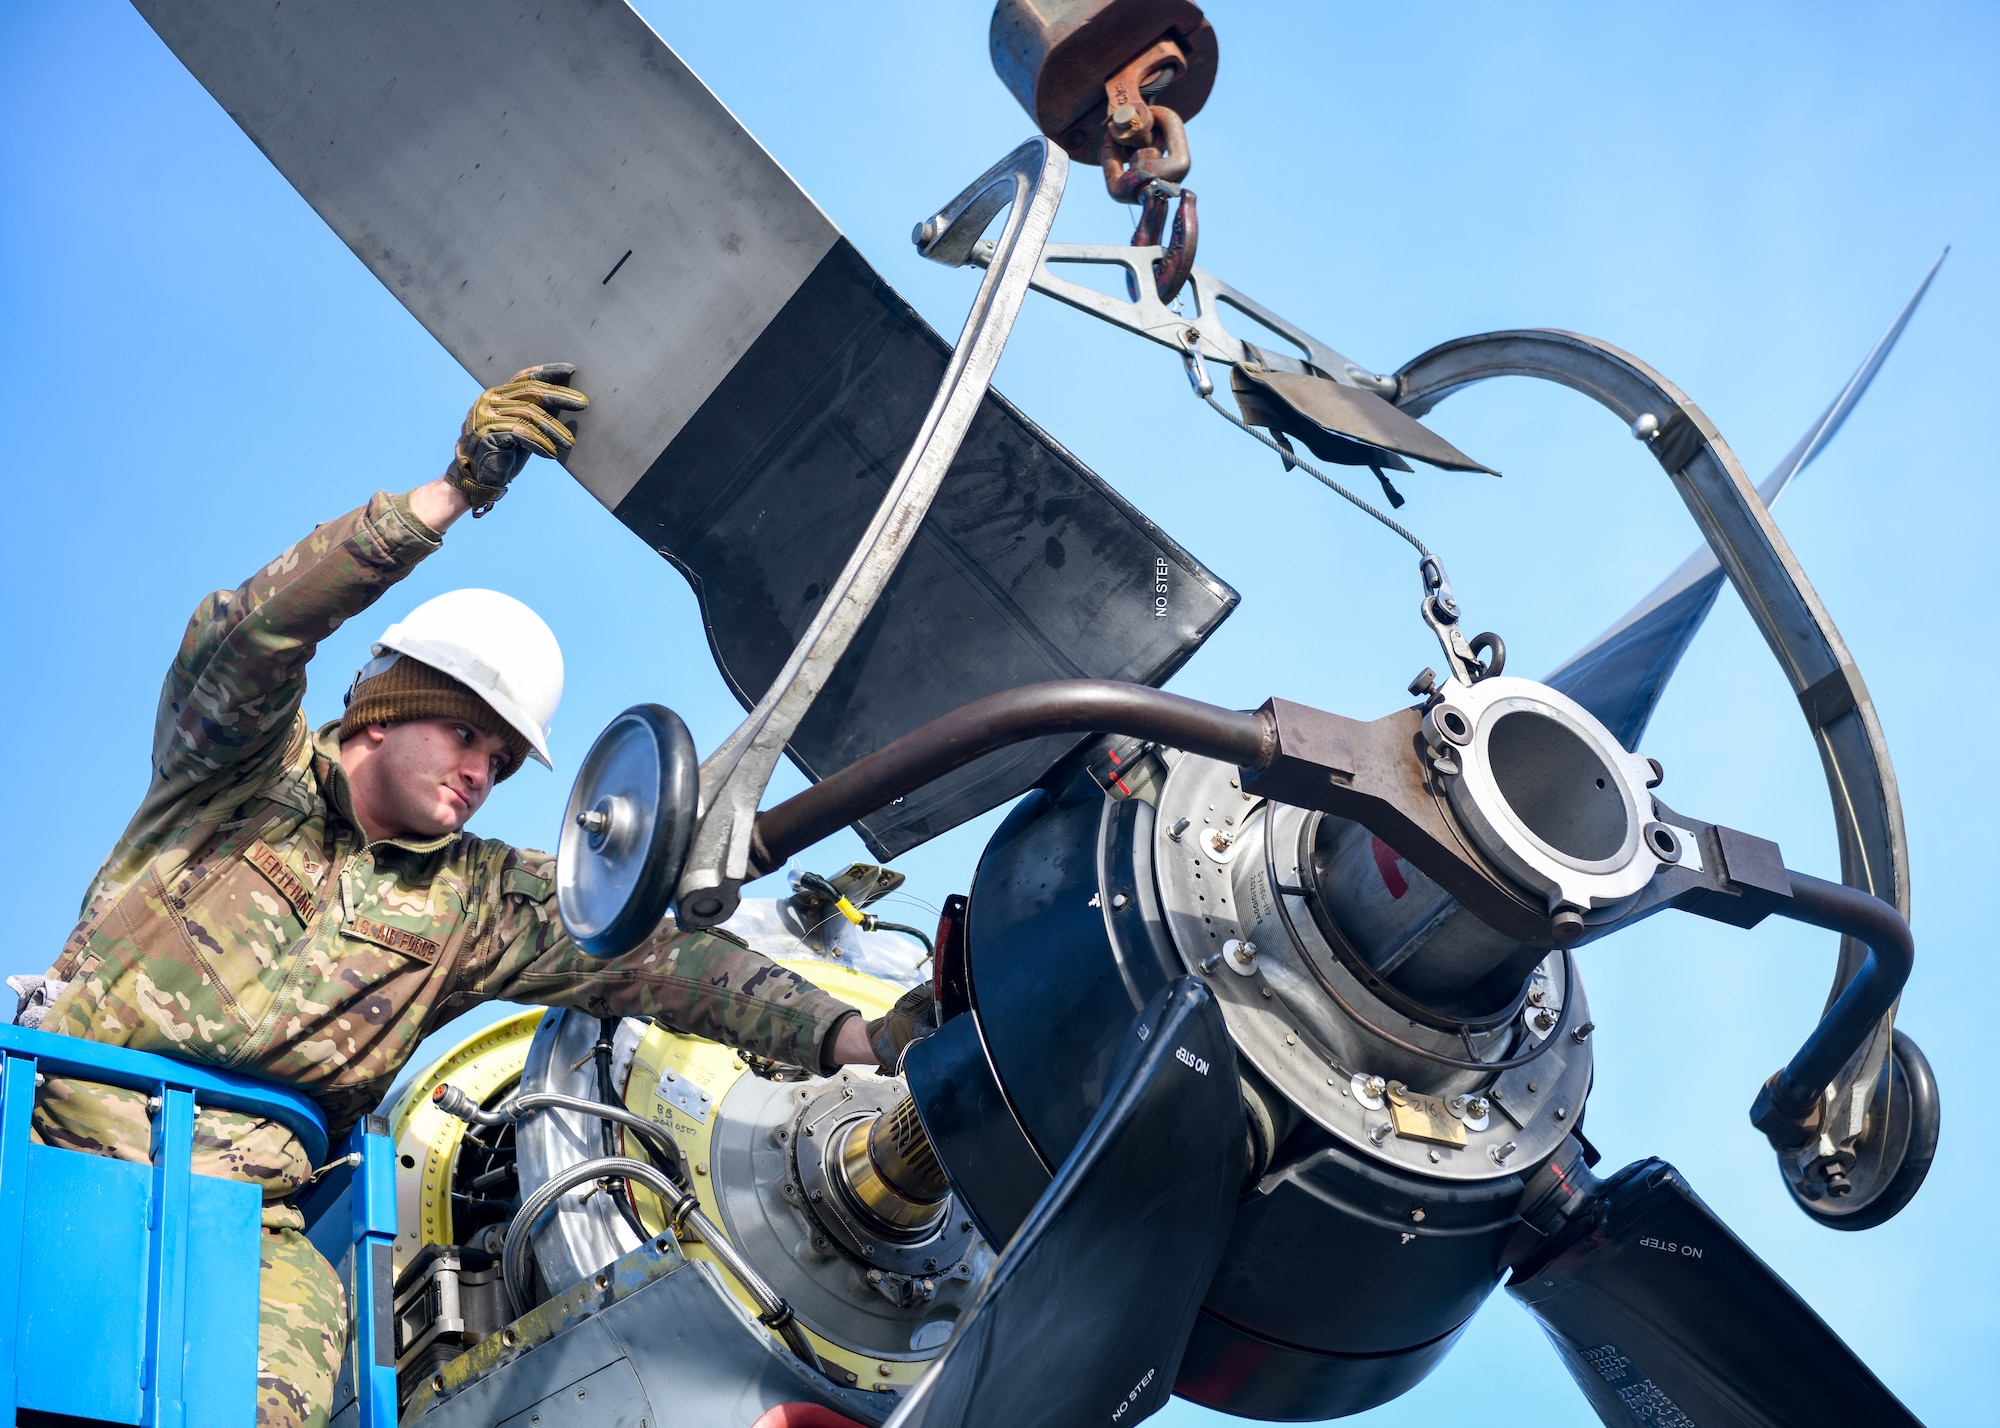 Staff Sgt. Anthony Verterano, an aerospace propulsion technician with the 910th Aircraft Maintenance Squadron, guides a propeller into position for installation onto a 910th Airlift Wing C-130H Hercules aircraft, Jan. 17, 2023, at Mountain Home Air Force Base, Idaho.